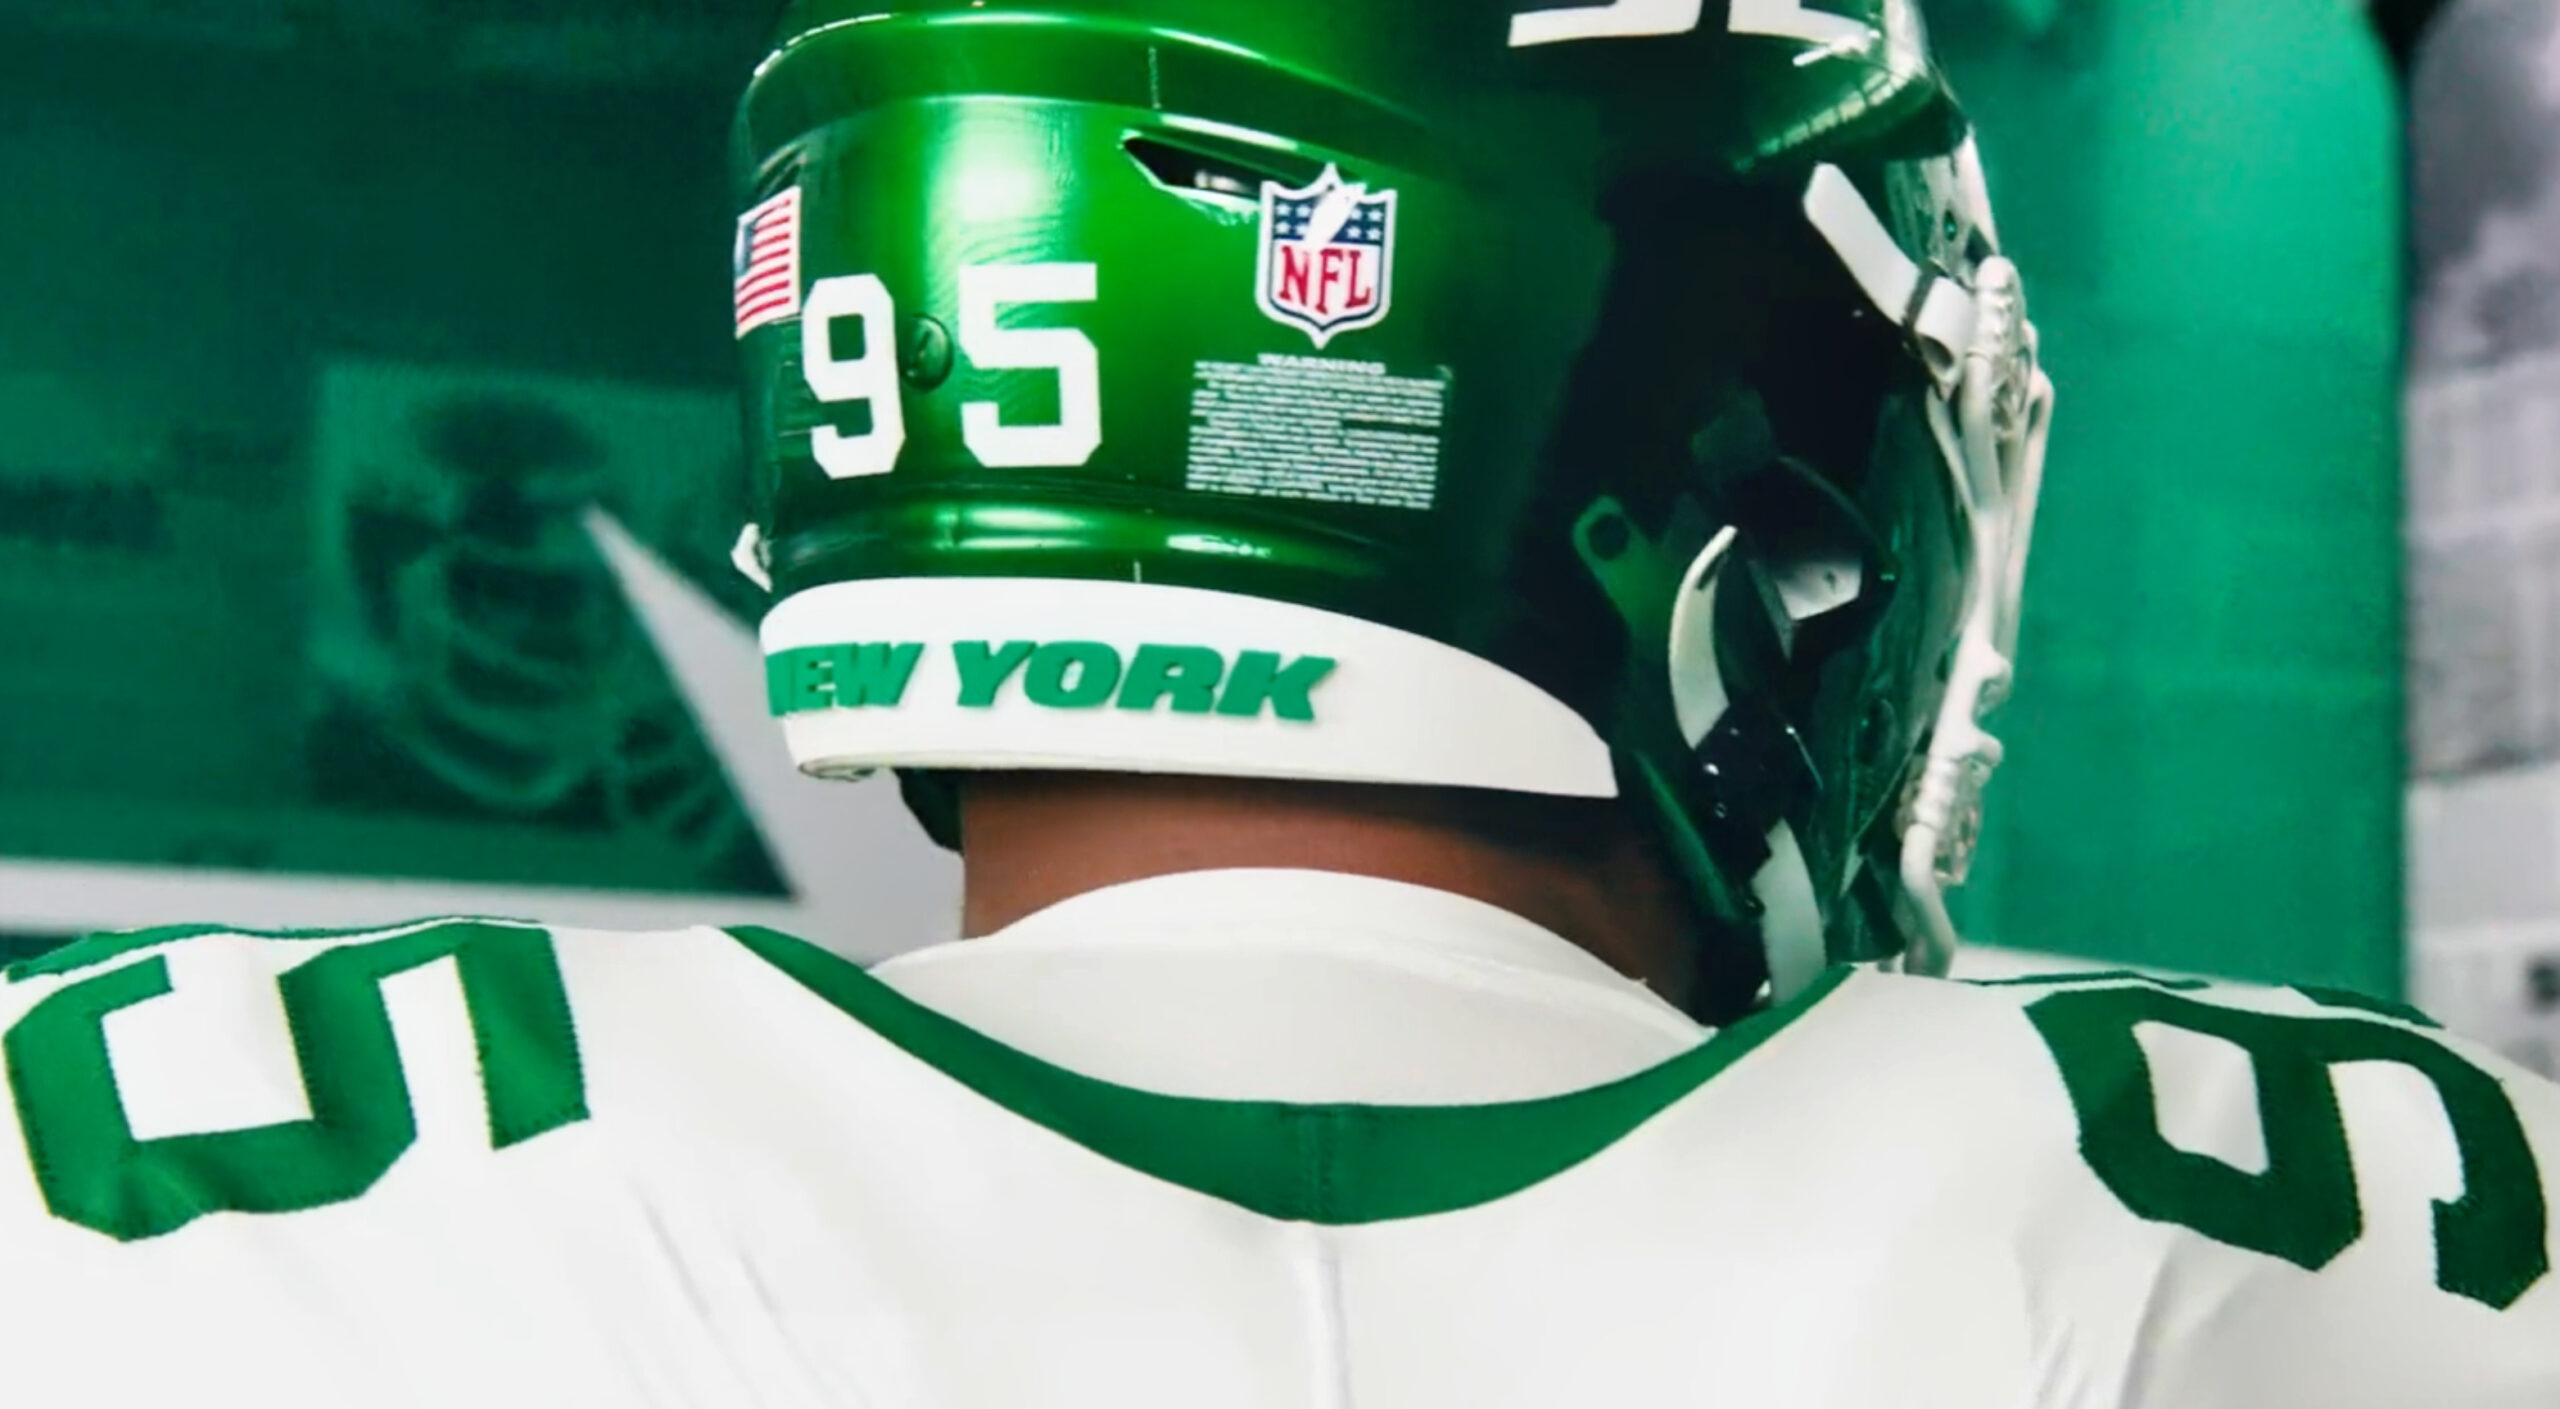 NEW YORK JETS RELEASE NEW THROWBACK UNIFORMS 